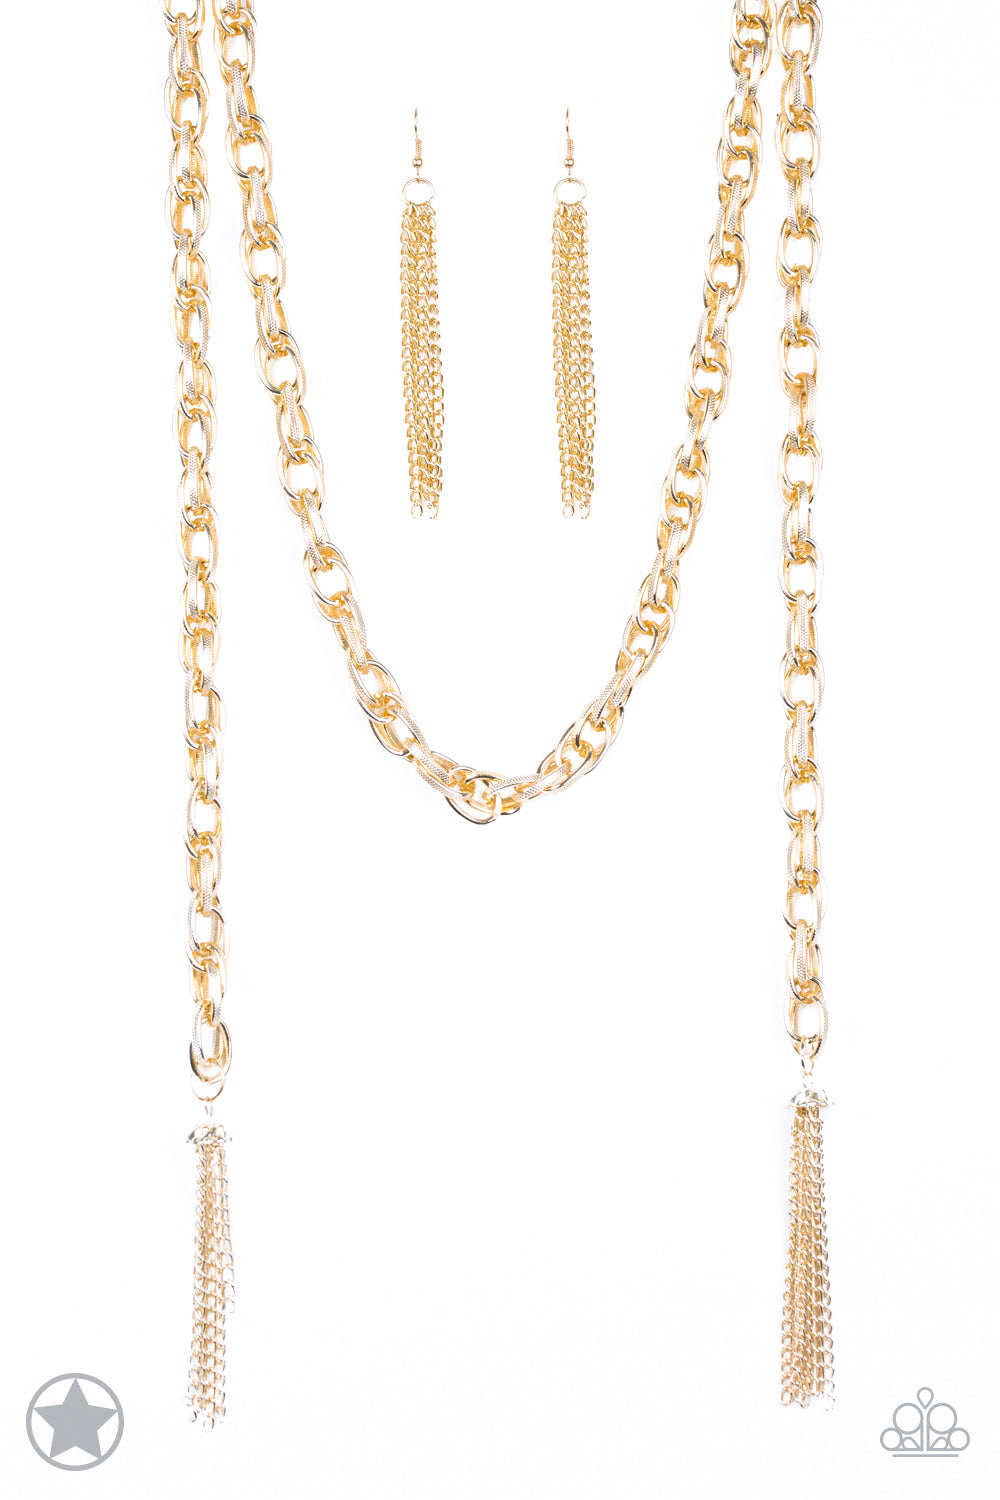 Paparazzi Accessories SCARFed for Attention - Gold Necklace Blockbuster - Be Adored Jewelry